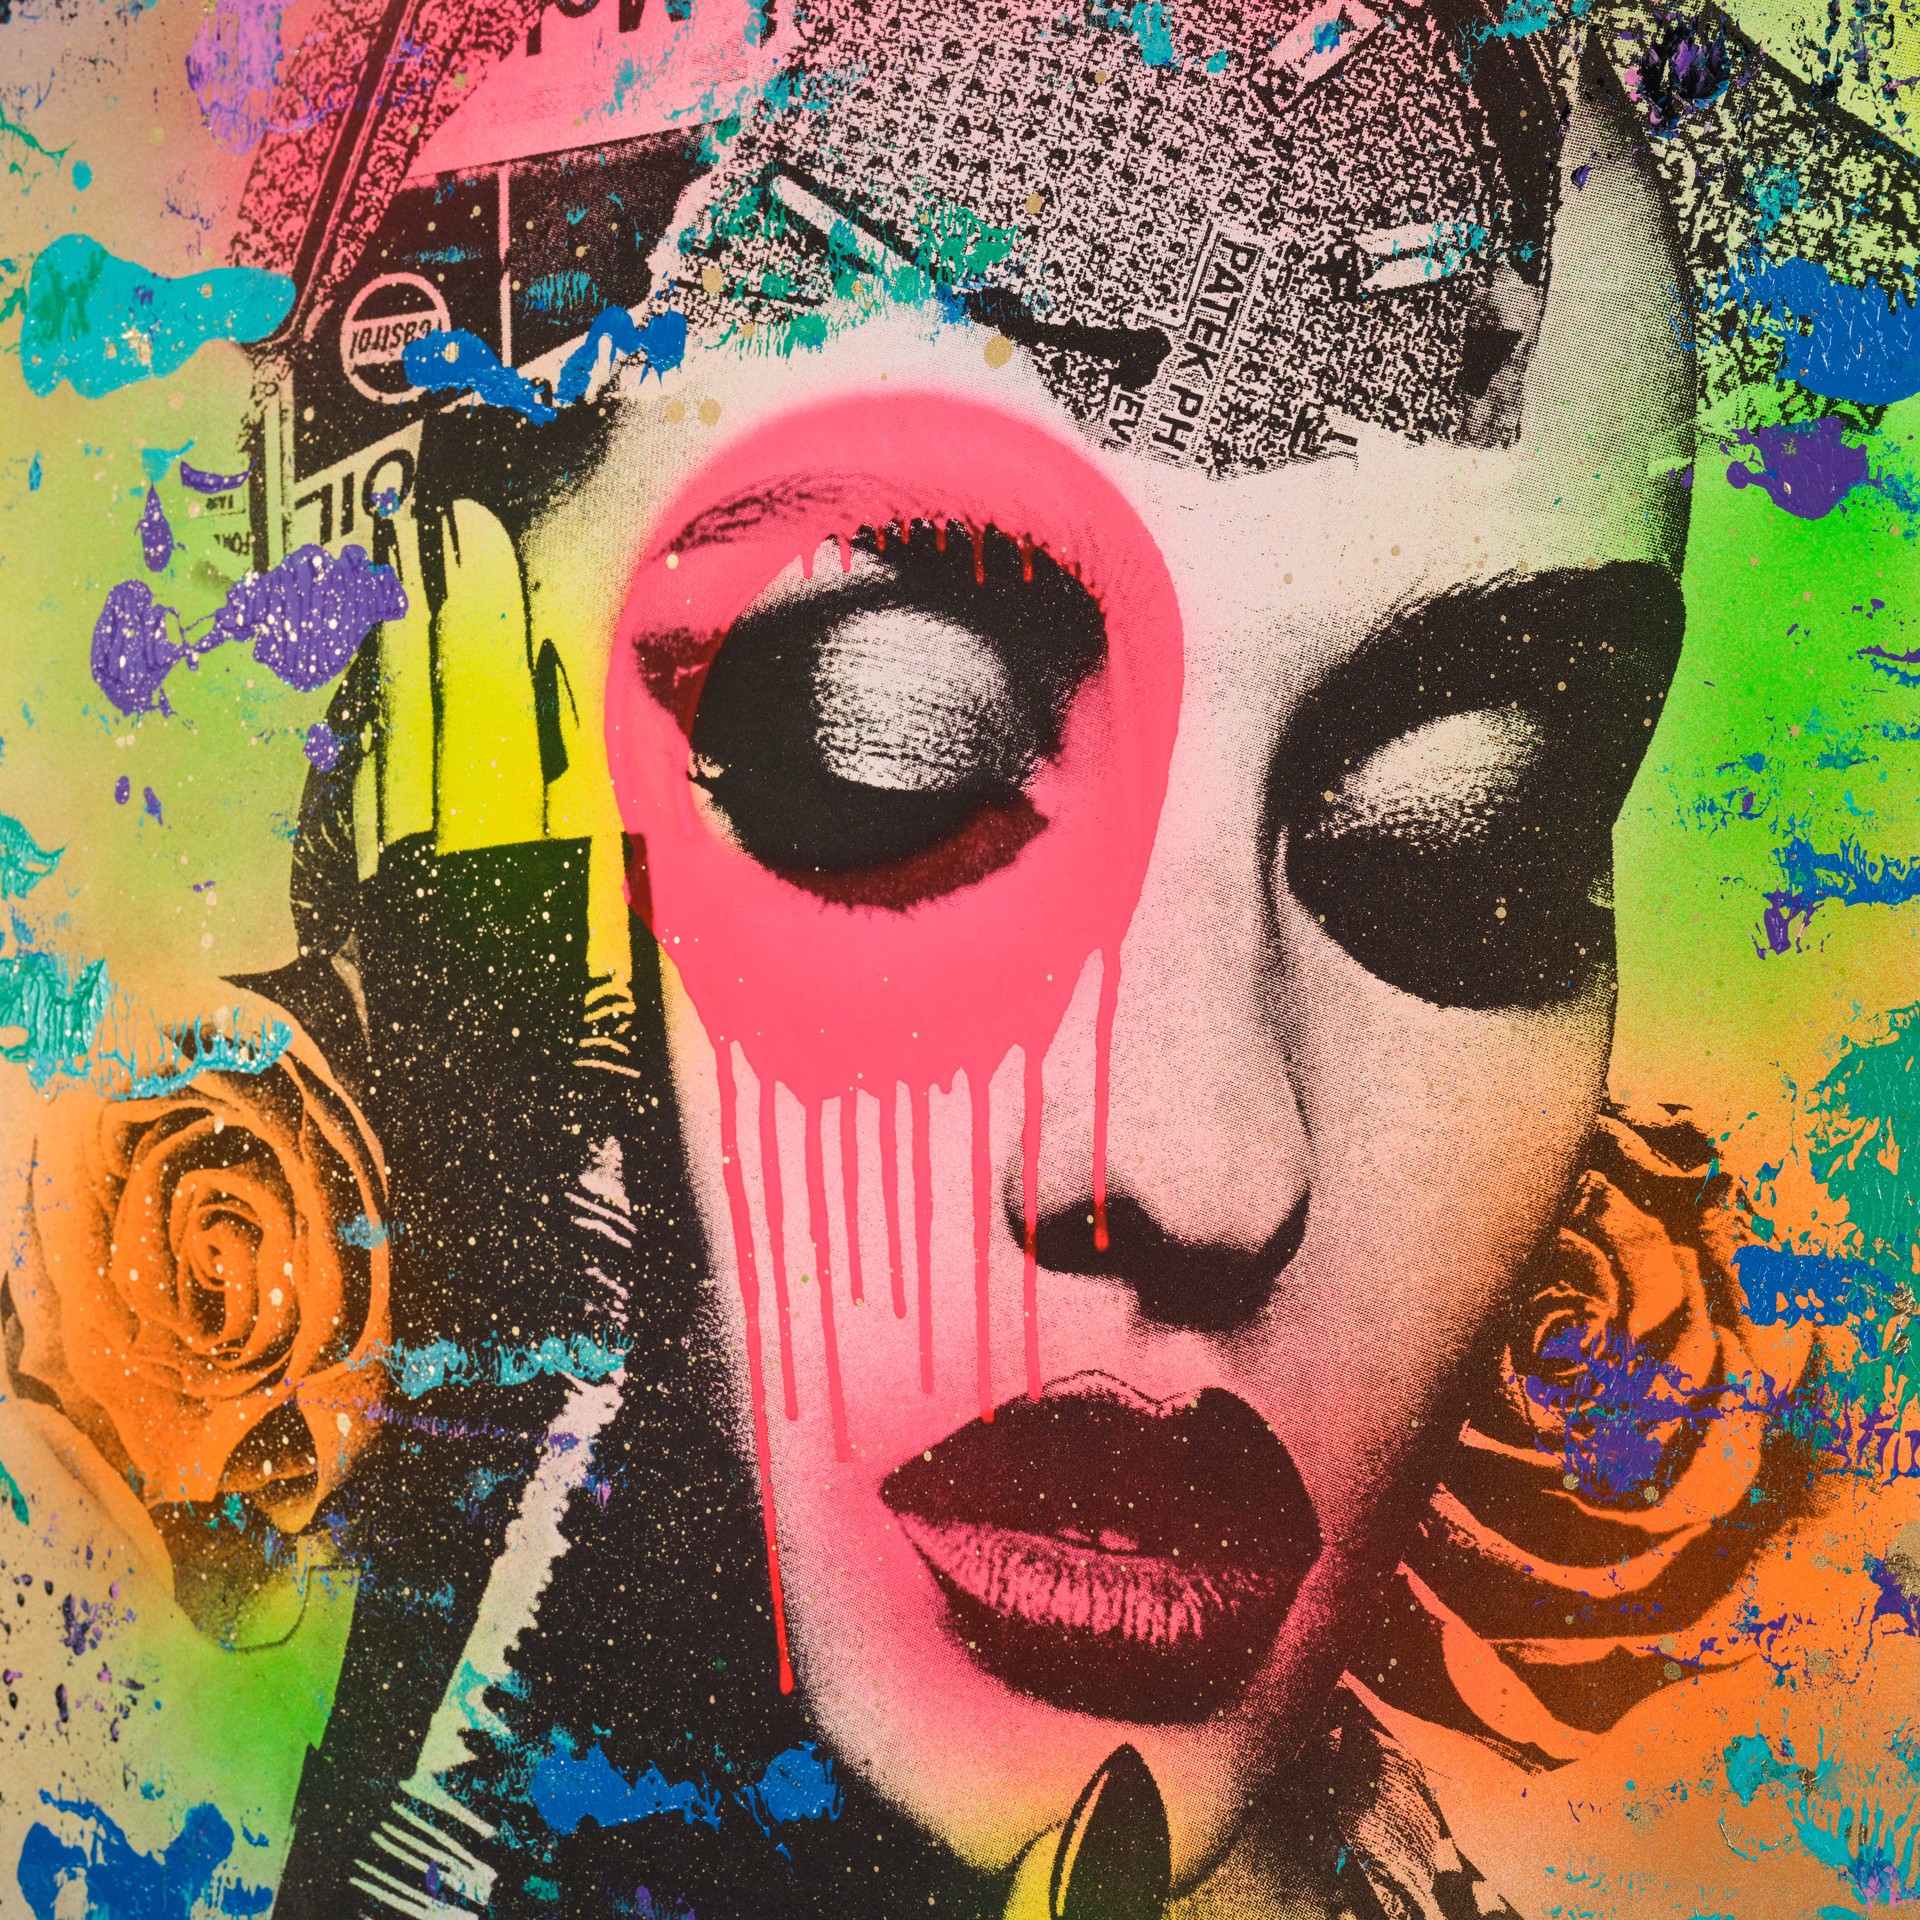 Untitled 4 by DAIN